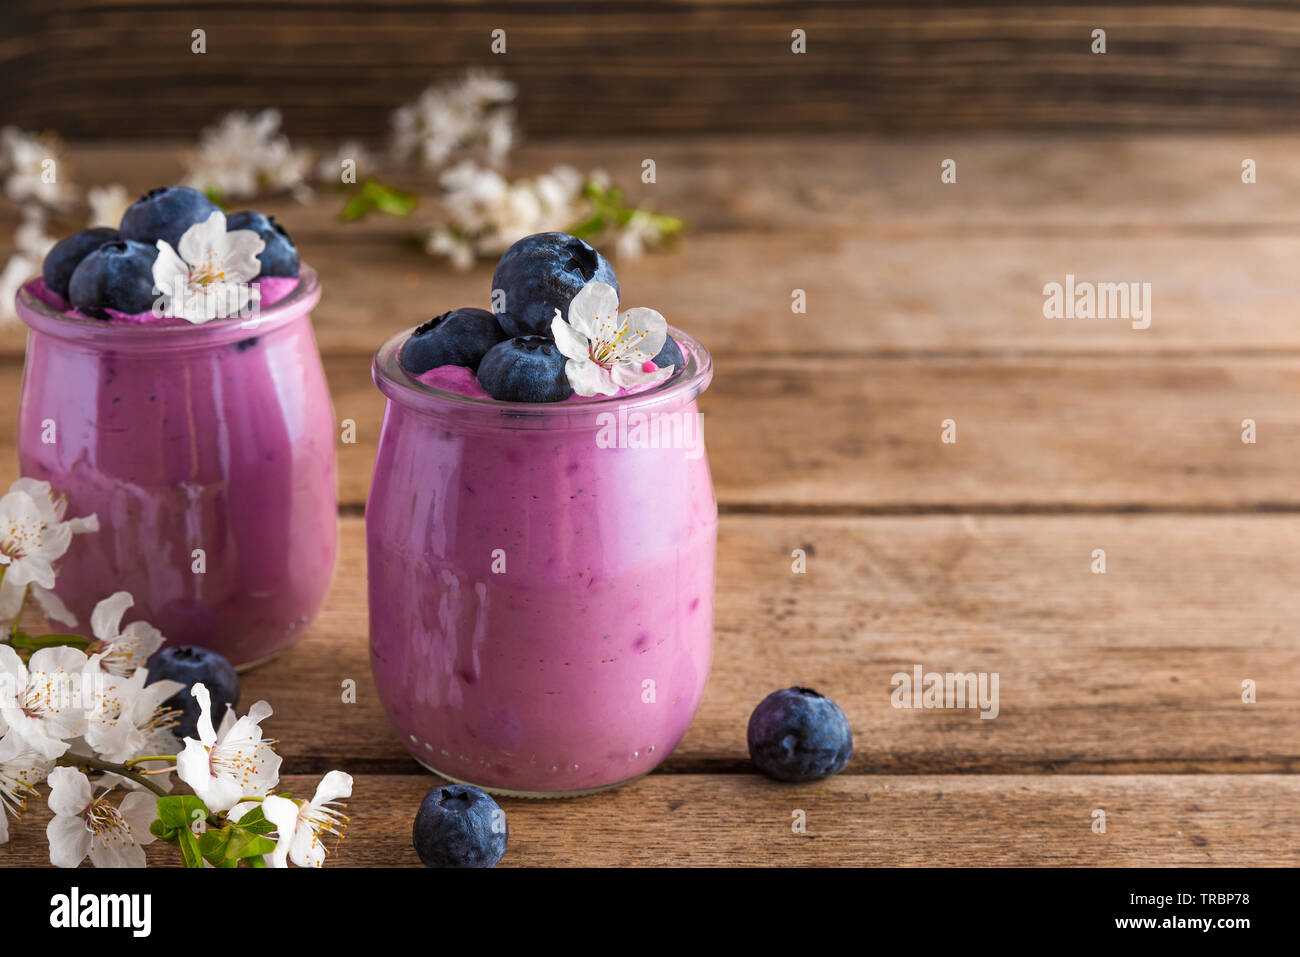 healthy breakfast. Blueberry yogurt in glasses served with fresh blueberries and spring blossom cherry flowers on rustic wooden table. close up Stock Photo